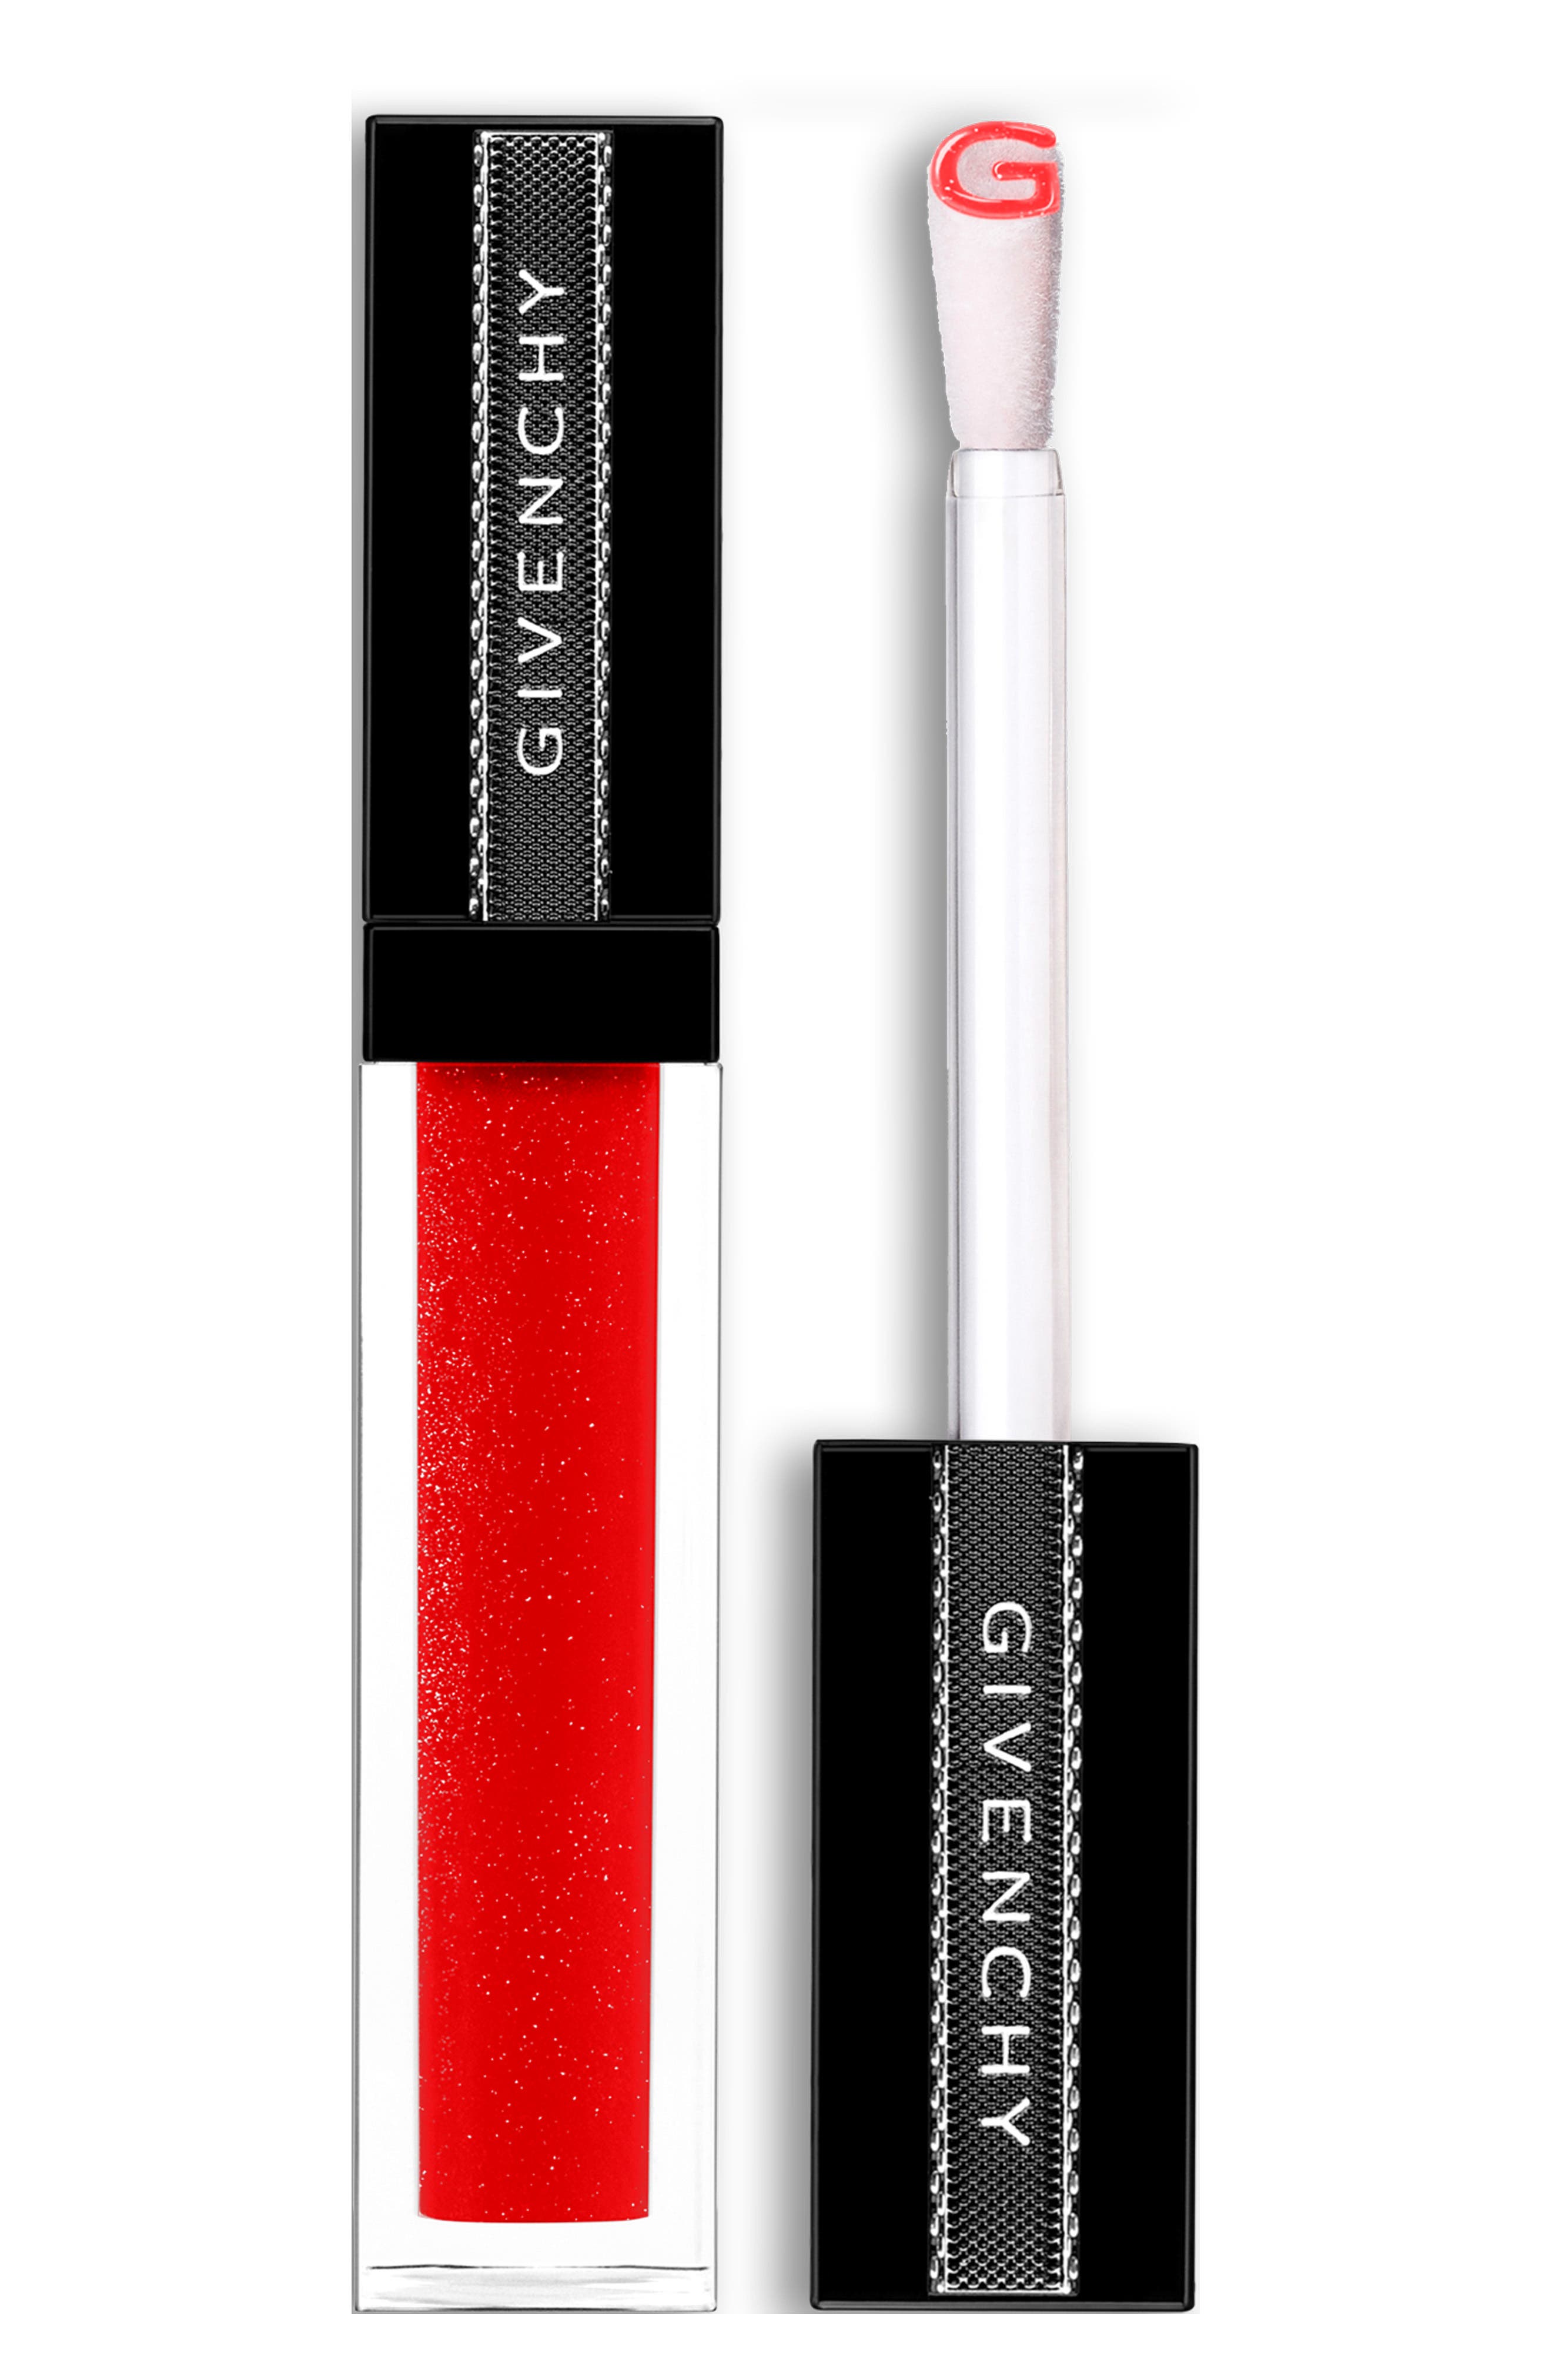 EAN 3274872355132 product image for Givenchy Gloss Interdit Vinyl Extreme Shine Lip Gloss - 12 Rouge Thriller | upcitemdb.com